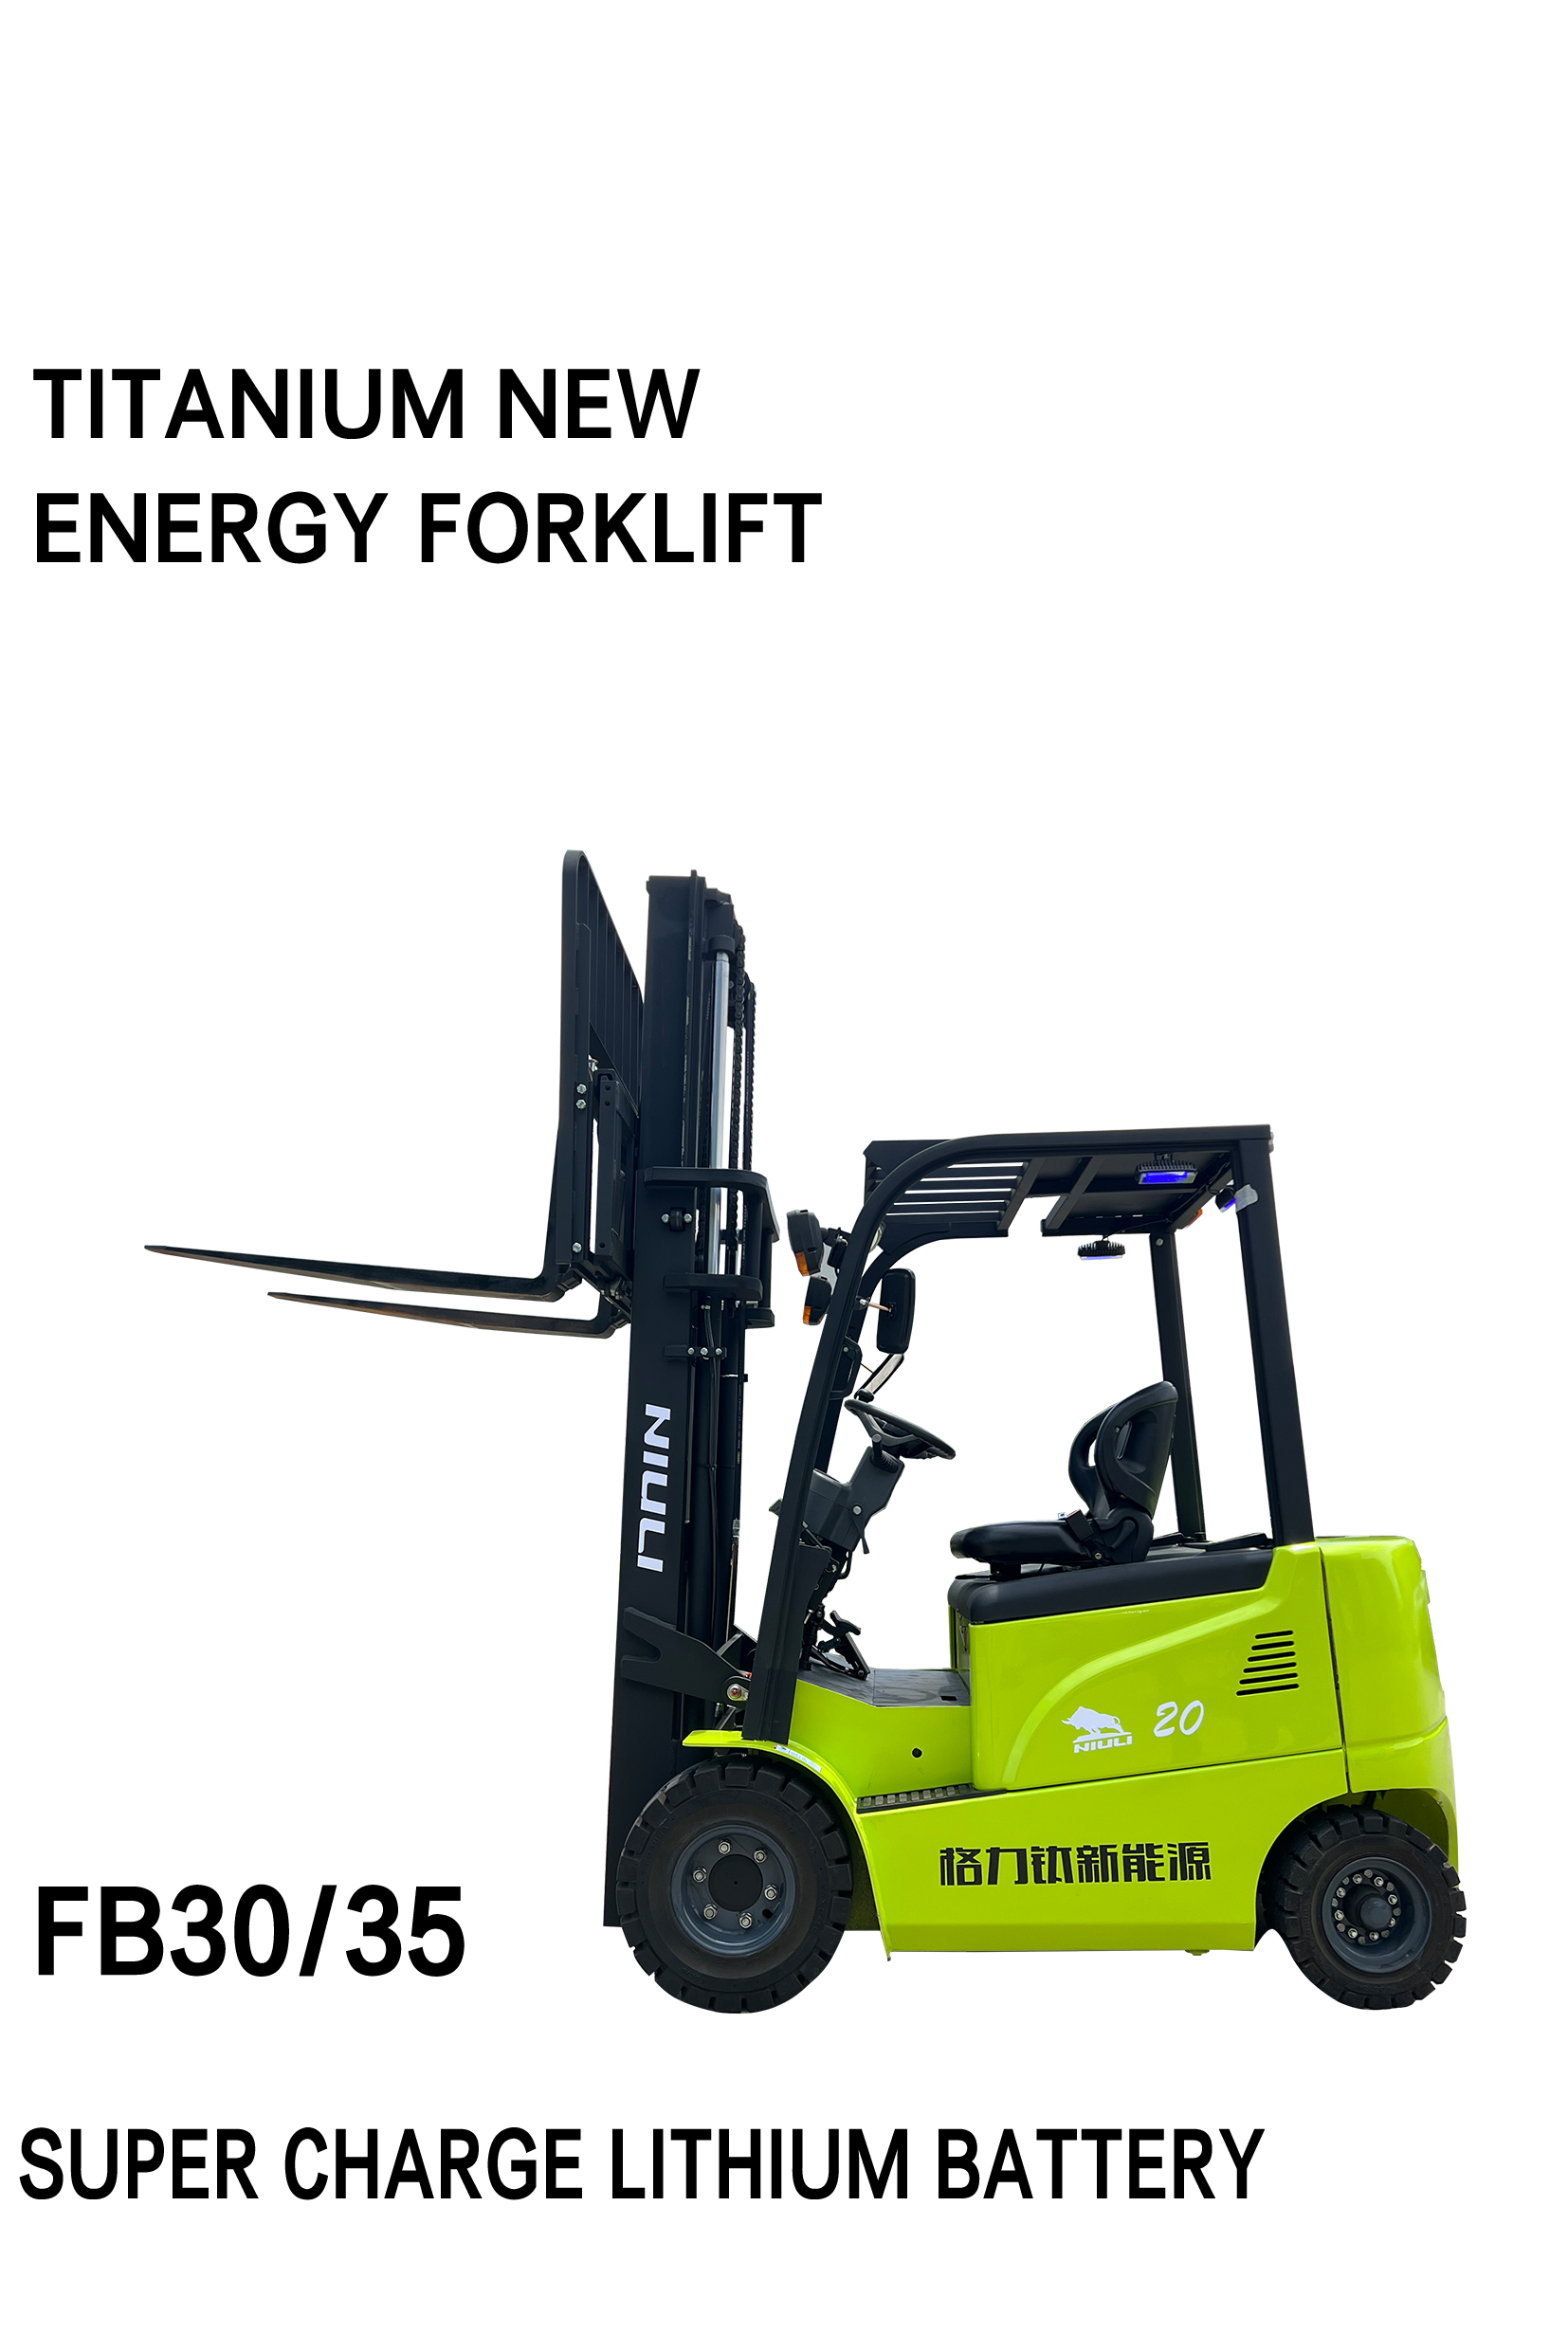 Revolutionizing Product Handling: The Advancement of Electric Forklifts, Reach Trucks, and Rough Terrain Forklift Trucks